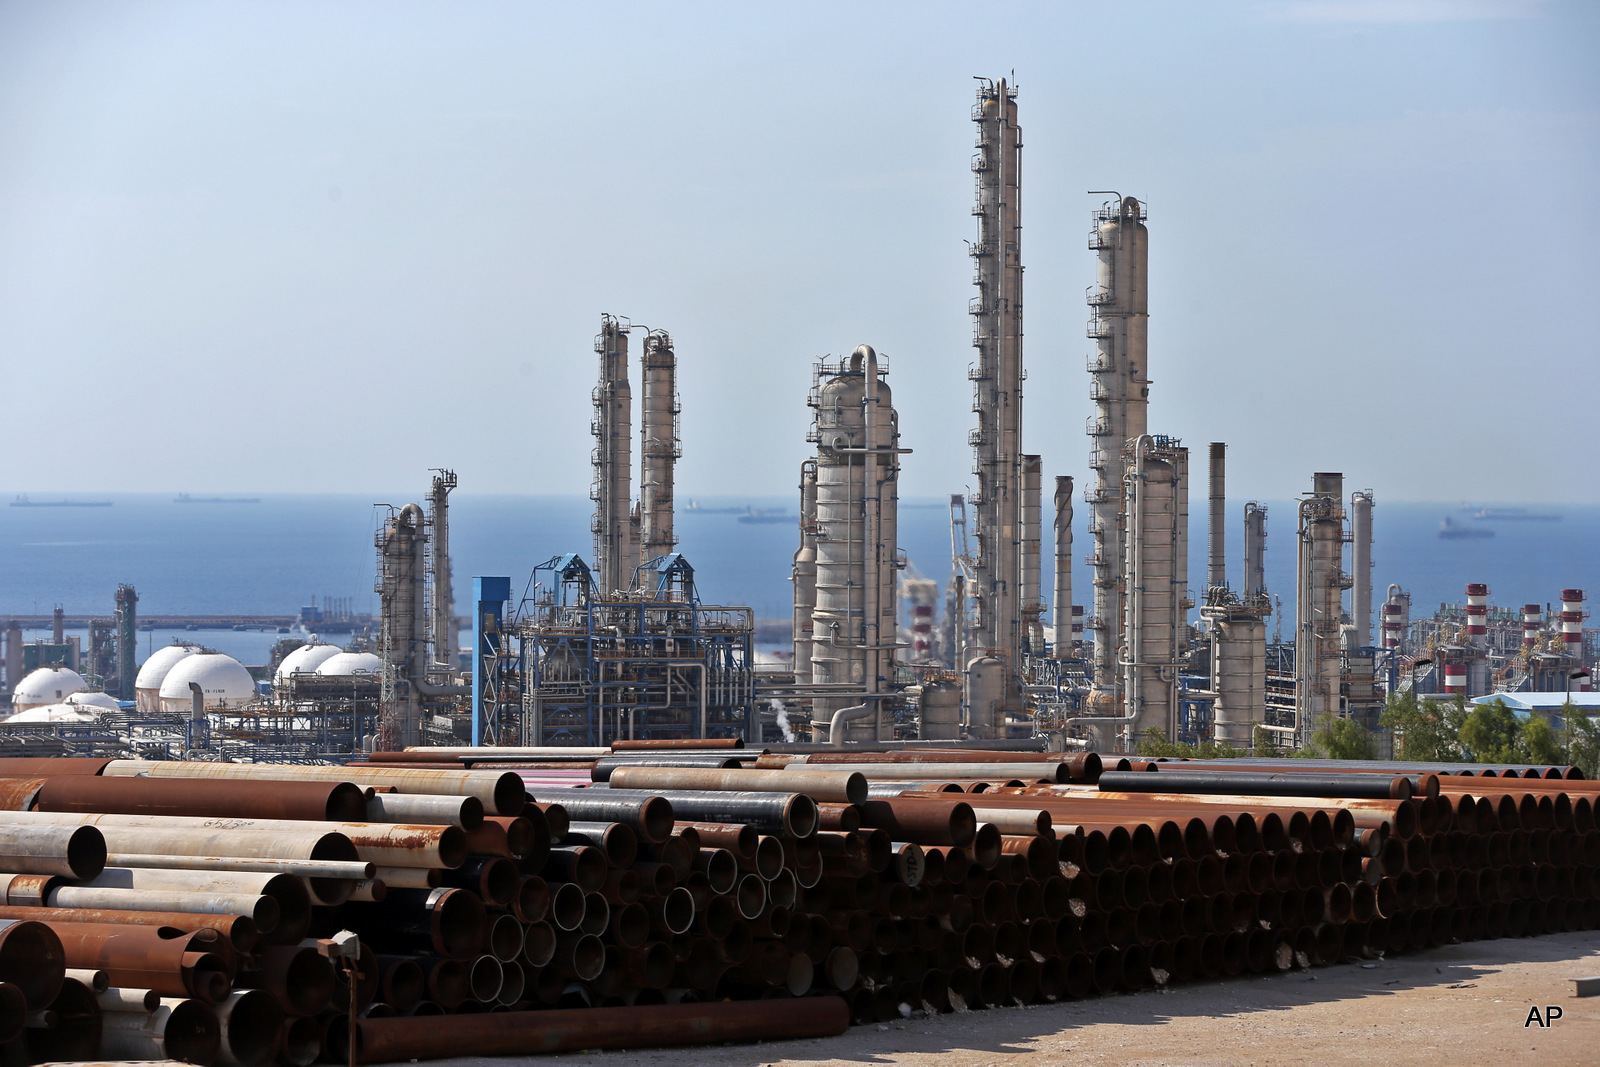 This Nov. 19, 2015 photo shows a general view of a petrochemical complex in the South Pars gas field in Asalouyeh, Iran, on the northern coast of Persian Gulf. Iran's oil Minister Bijan Zanganeh on Tuesday said Iran will host a summit of the world’s major gas producing countries Saturday. The meeting of the Gas Exporting Countries Forum (GECF) will bring major producers such as Russia, Qatar and Algeria to Iran, which itself is the world's third largest producer after the U.S. and Russia.